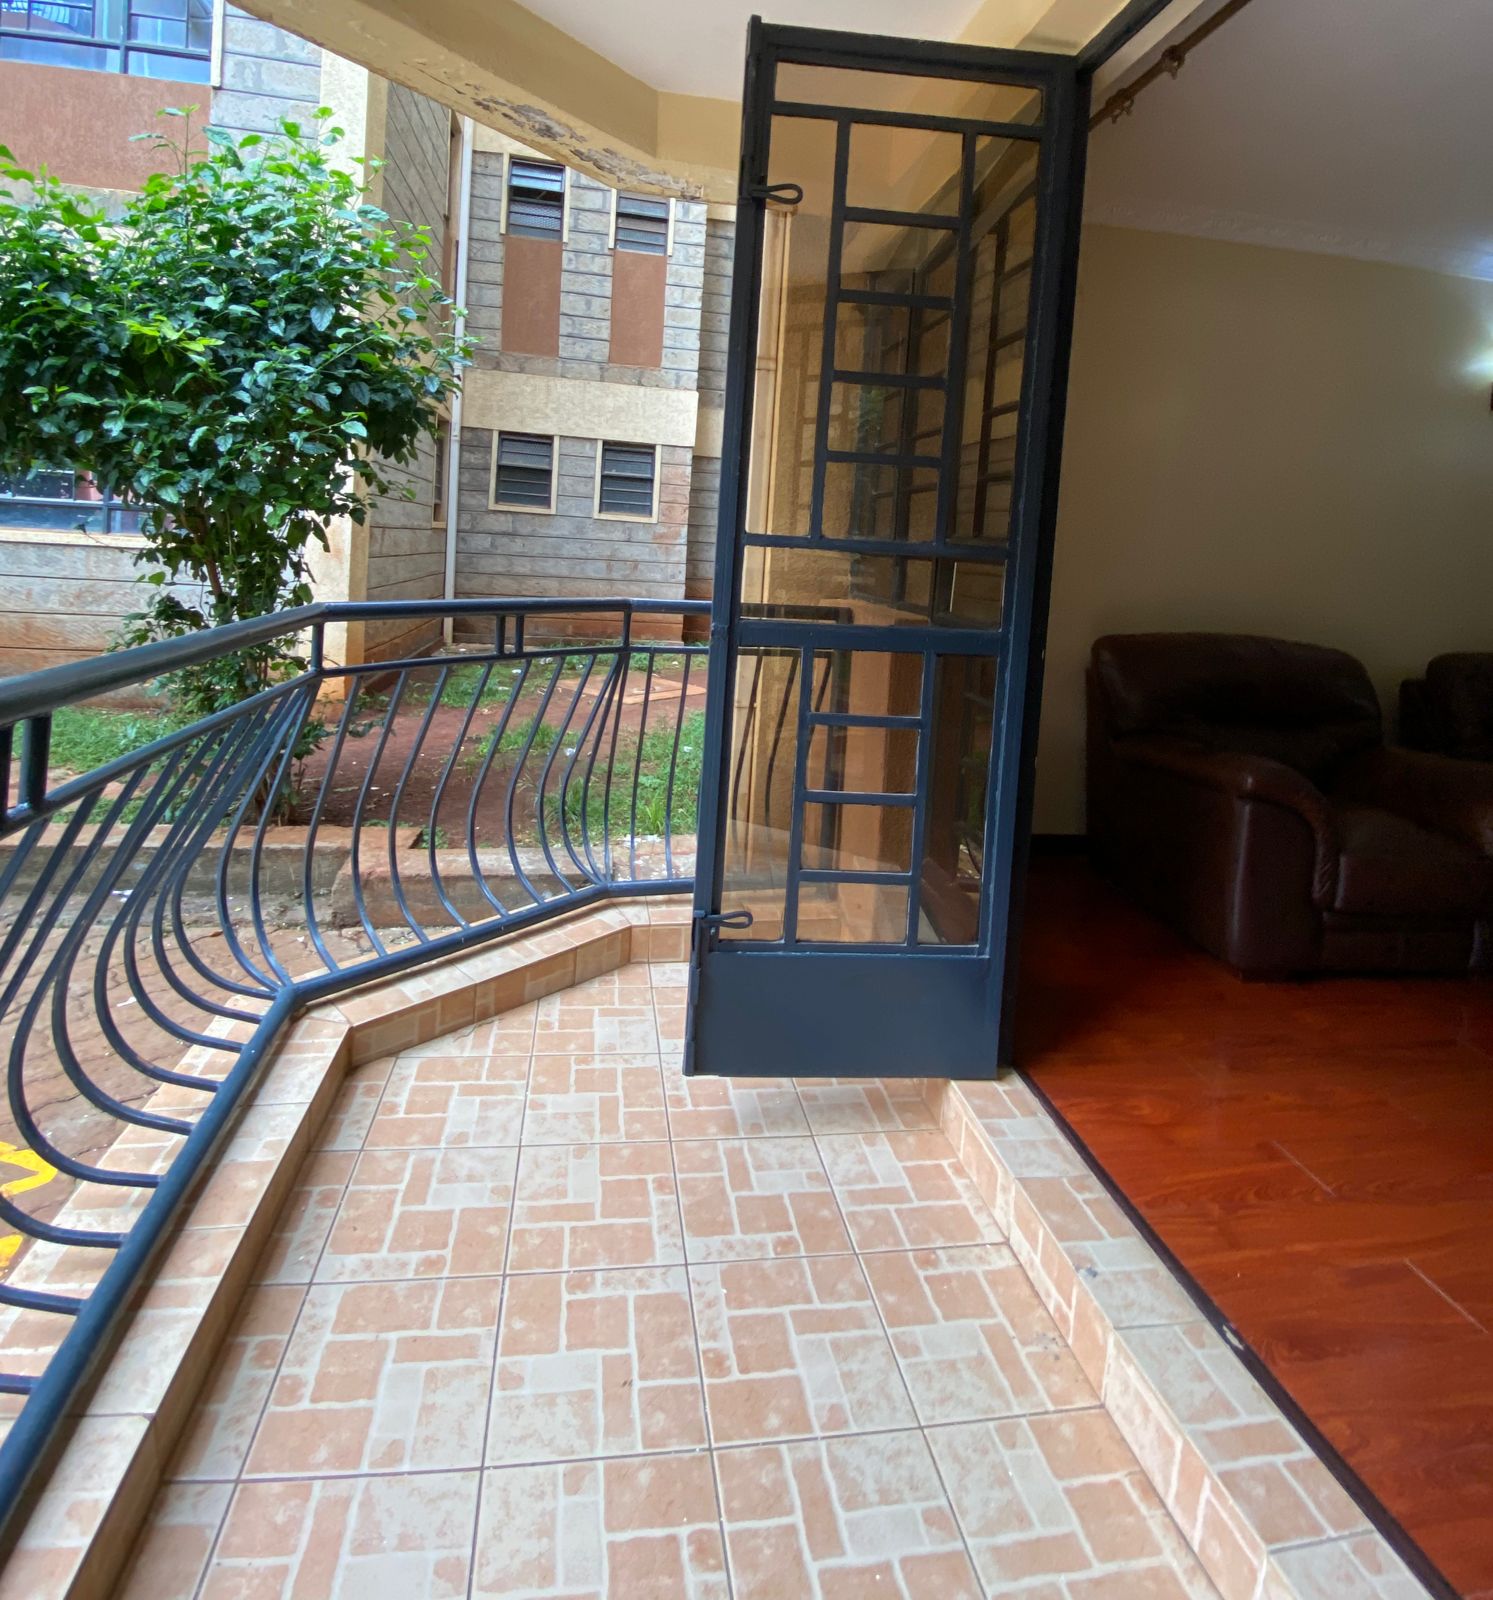 Spacious 3 Bedroom Apartment For Sale in Kasarani with backup generator, borehole, ample parking, and good security. Asking price: 8.5M. Musilli Homes.